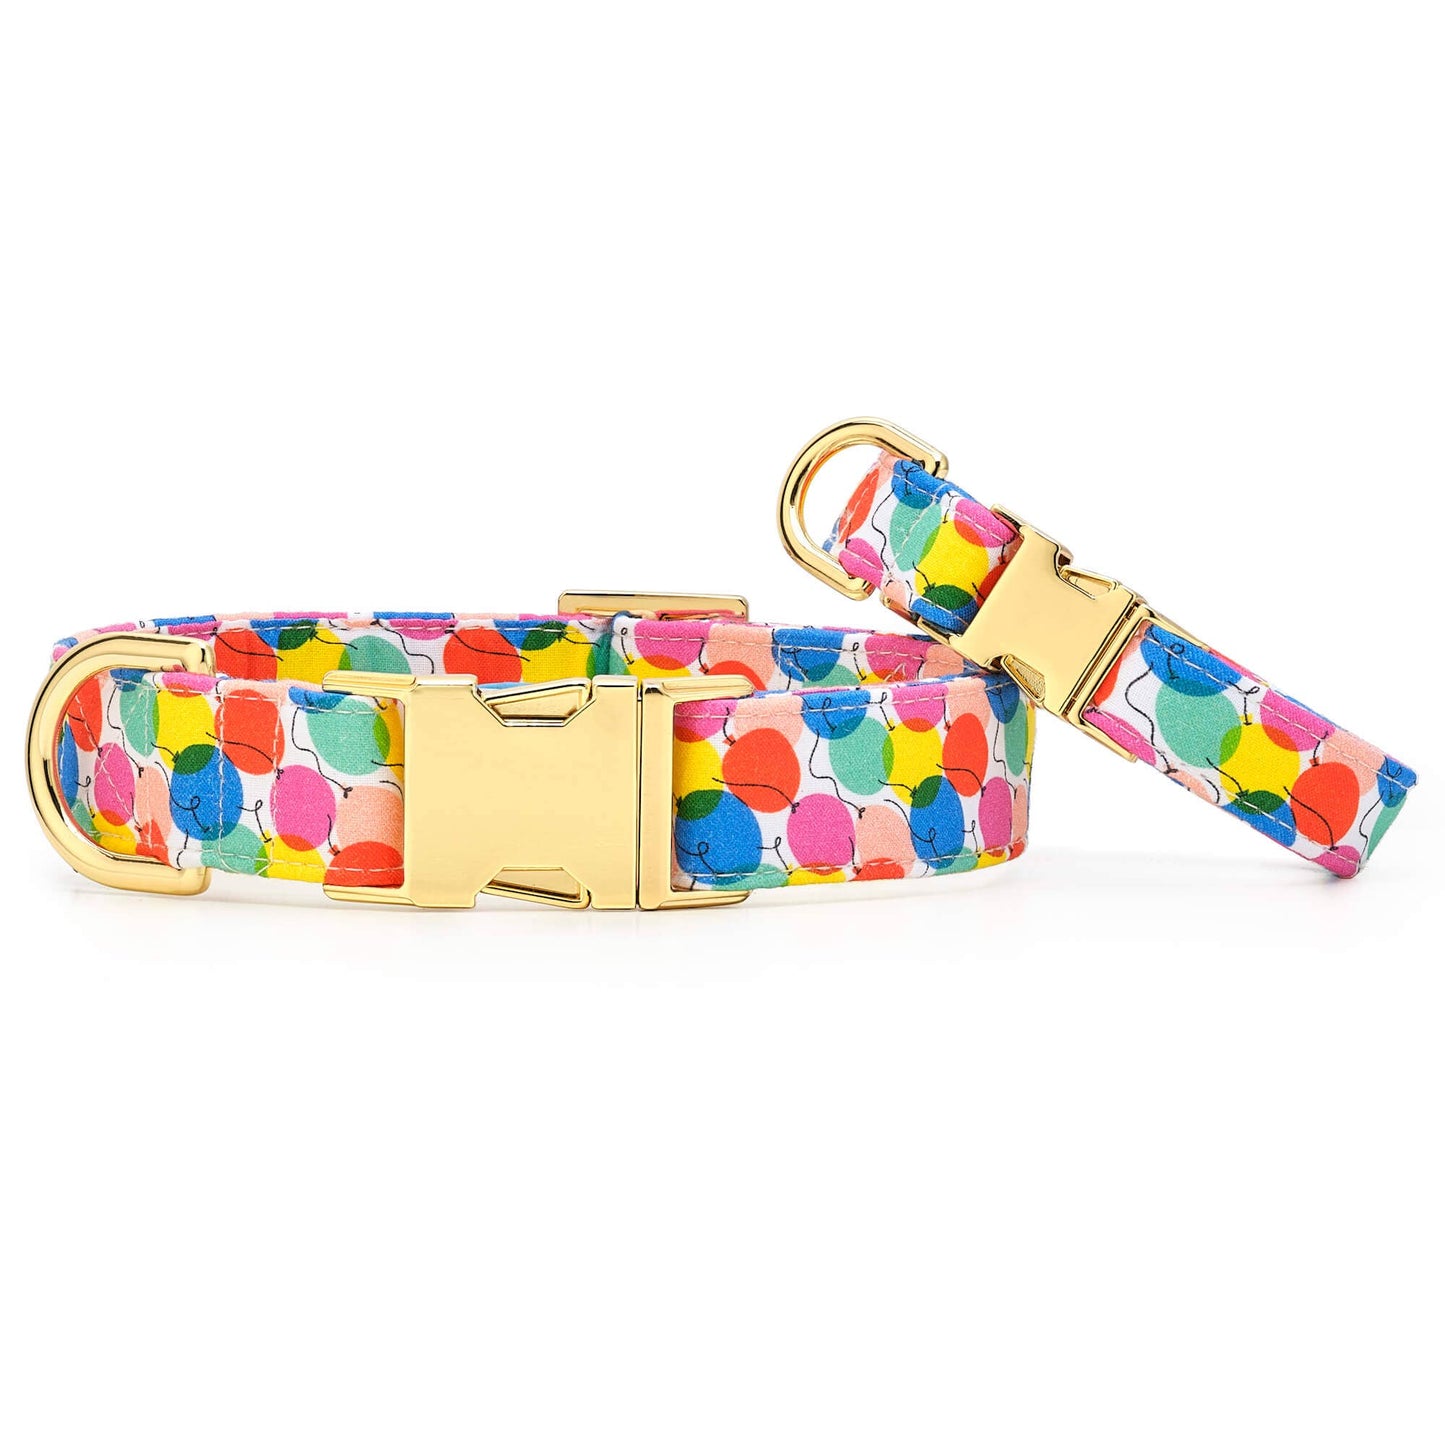 Pup, Pup, and Away Birthday Dog Collar: L/ Gold